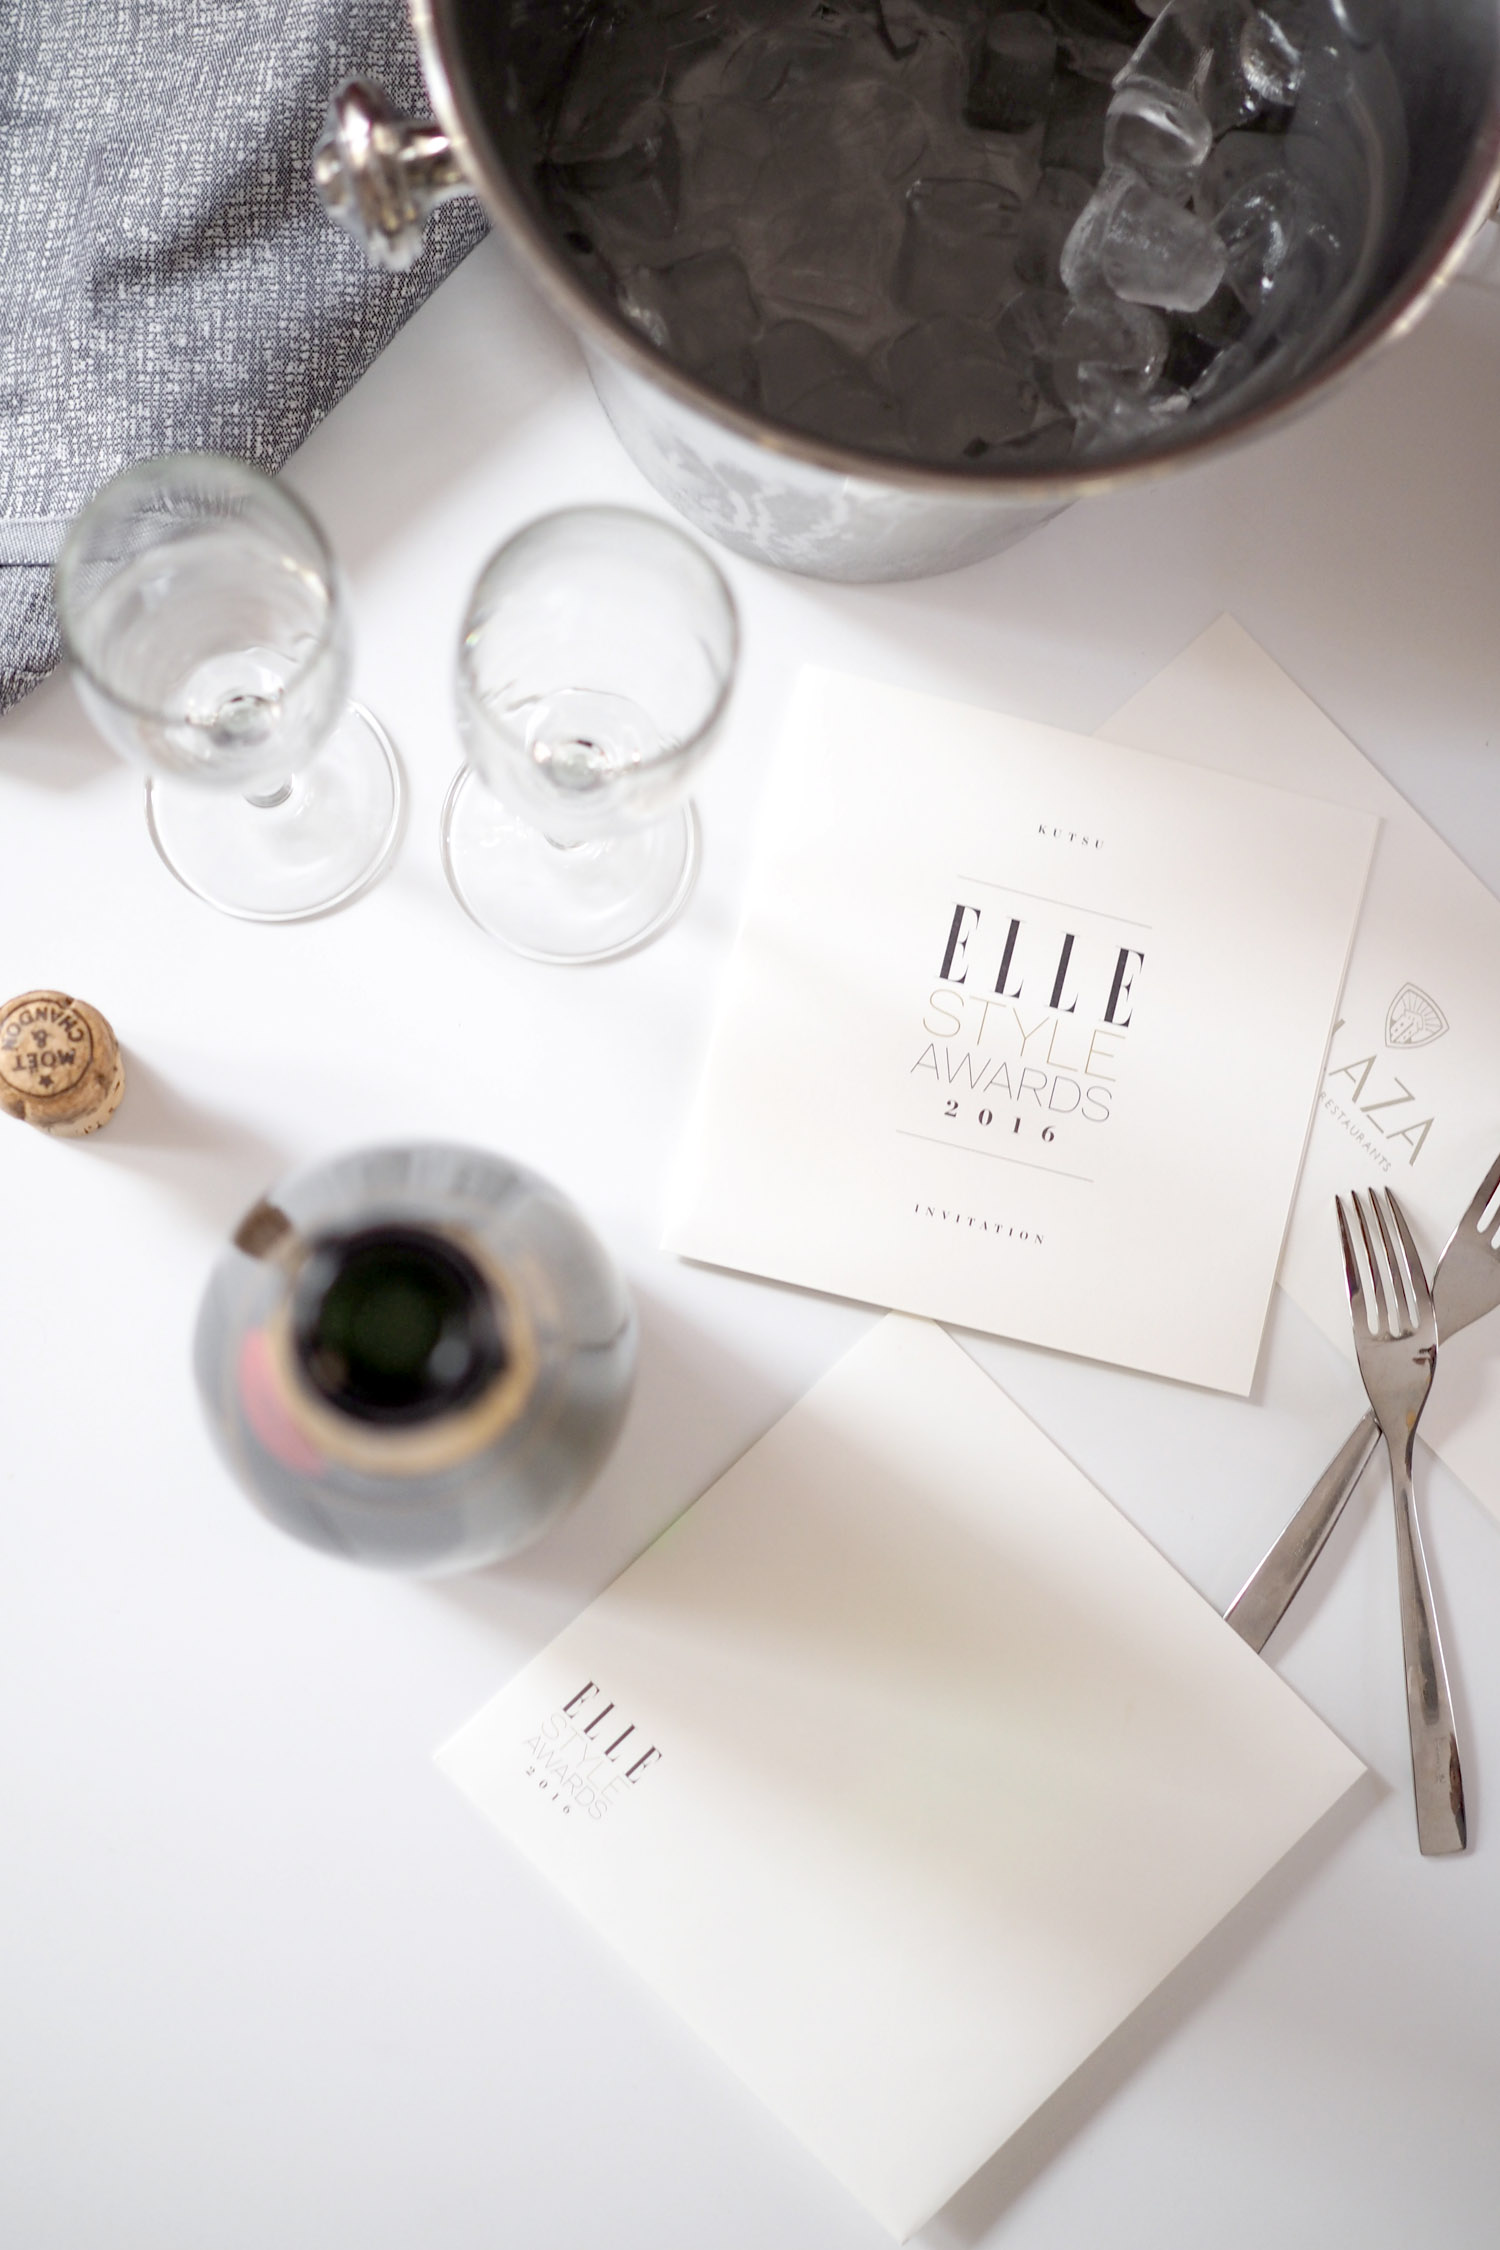 C and the city - ELLE Style Awards 2016 at Vanha Ylioppilastalo in Helsinki, Finland - read more on the blog: //www.idealista.fi/charandthecity/2016/10/22/elle-style-awards-2016-preparty